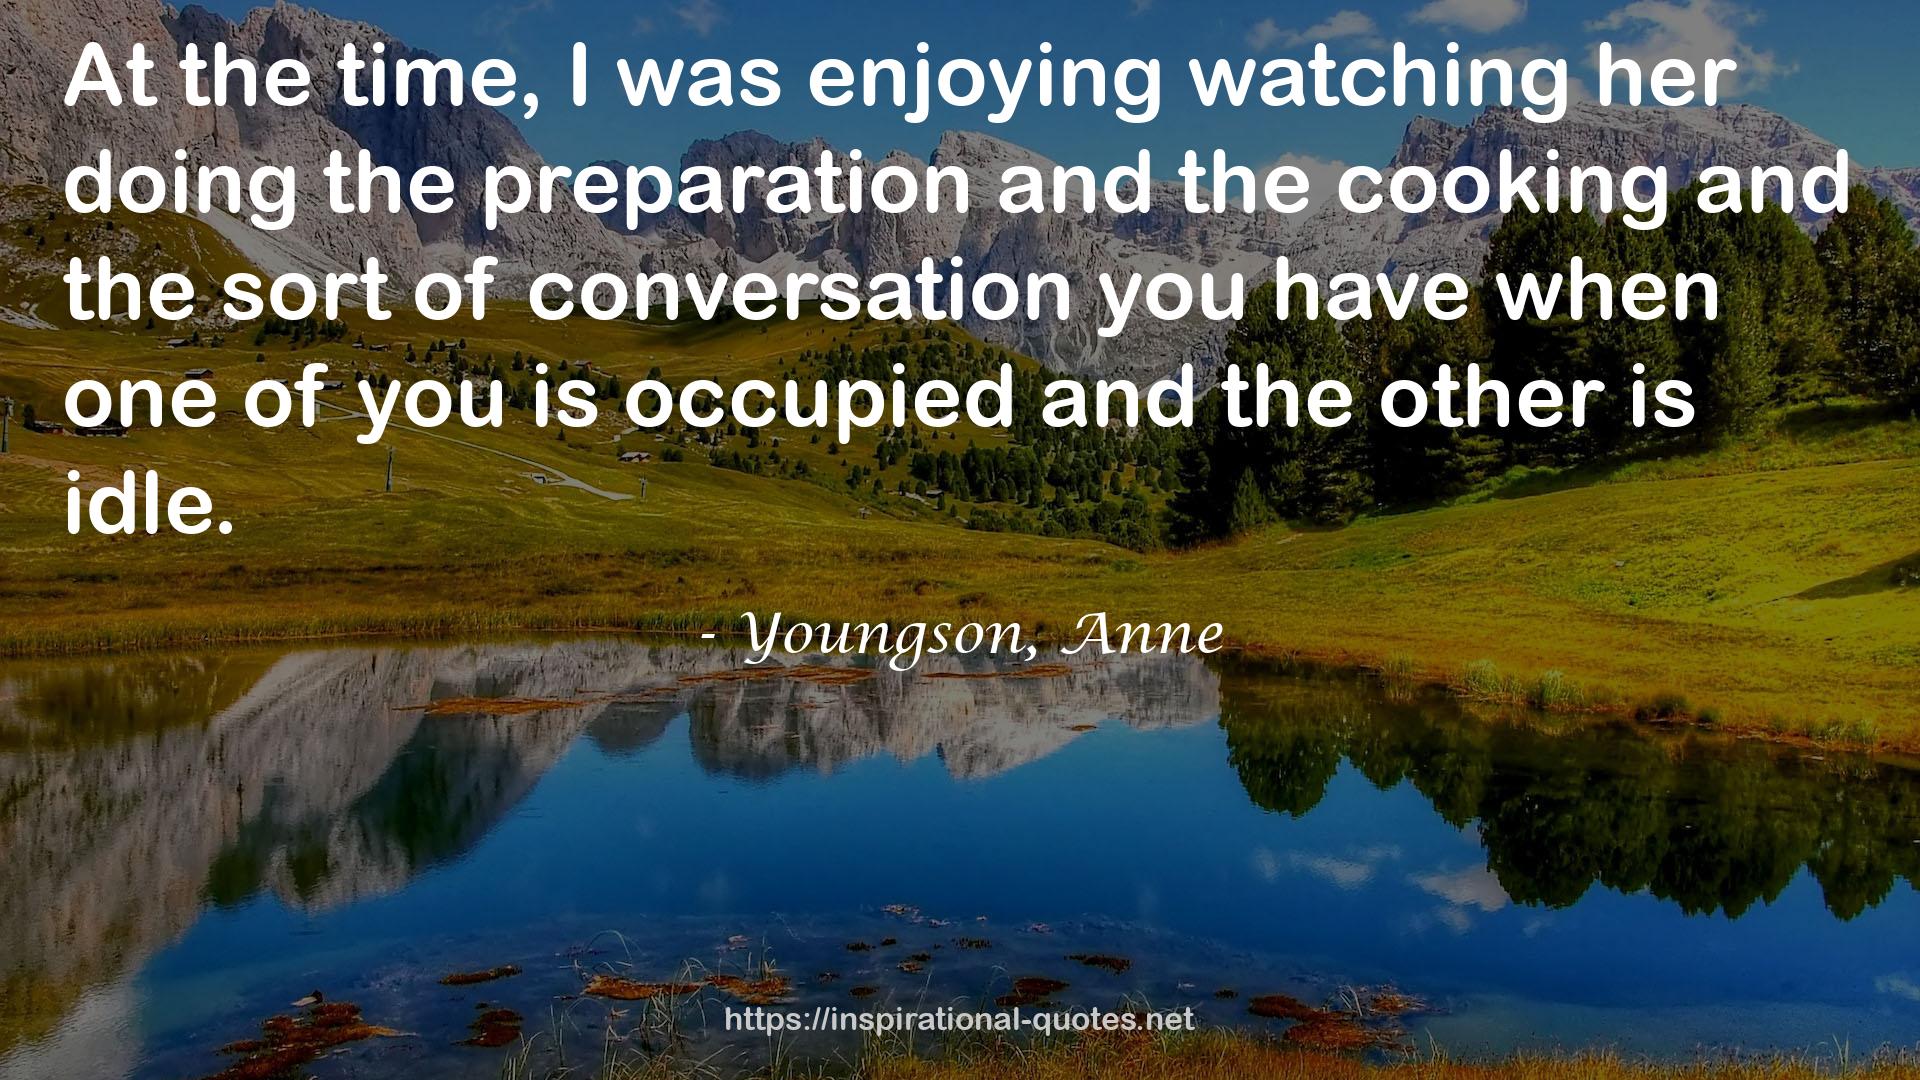 Youngson, Anne QUOTES